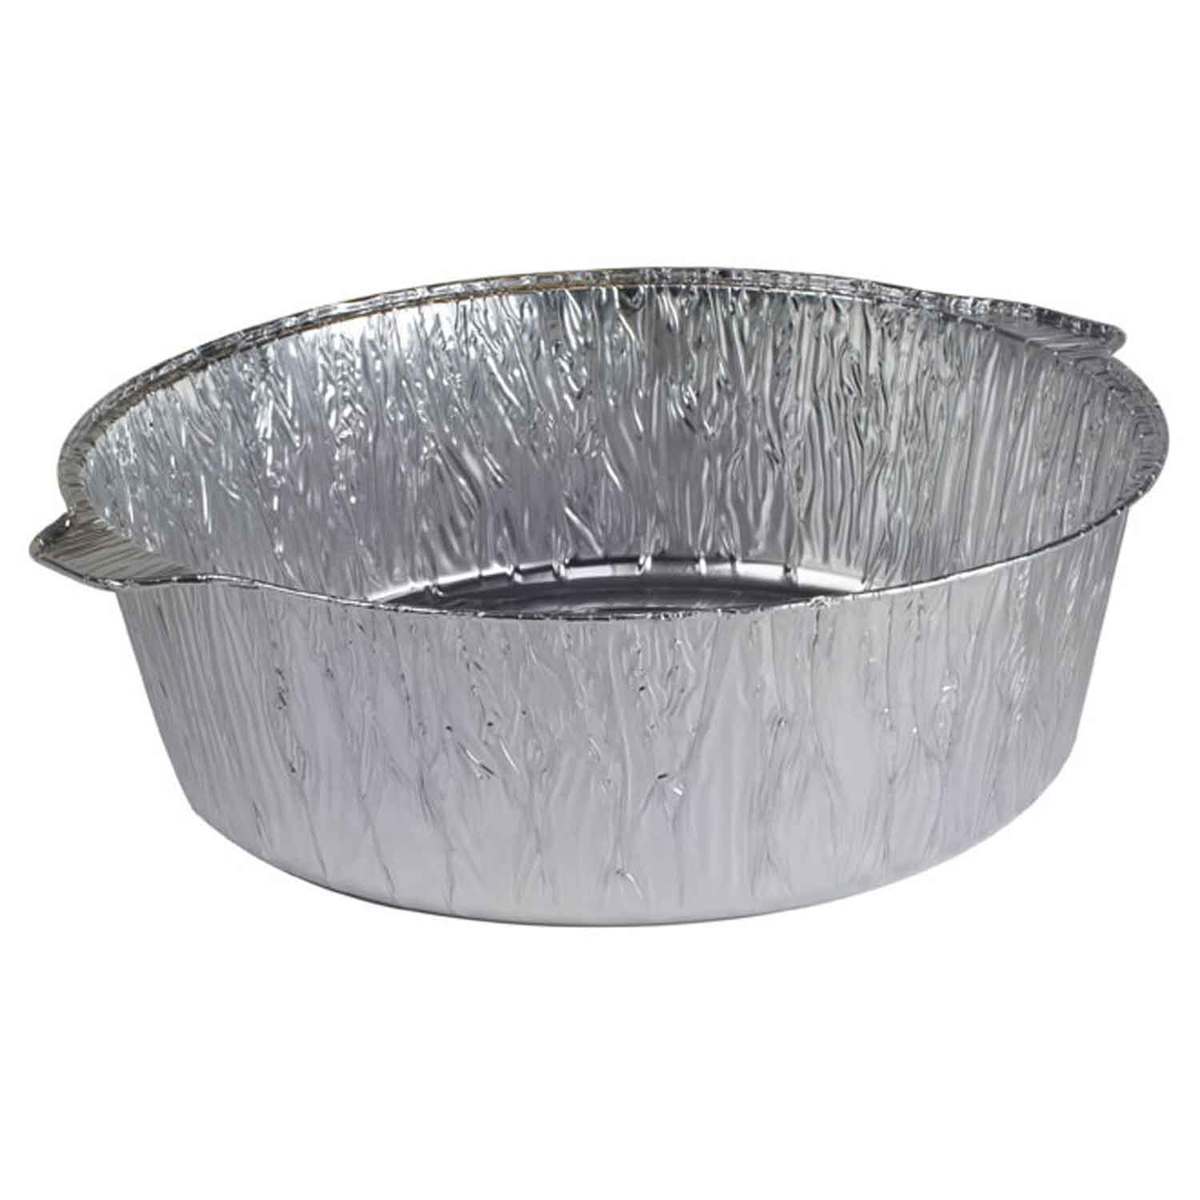 Lodge A12F12 12-Inch Aluminum Foil Dutch Oven Liners, 12-Pack, Silver